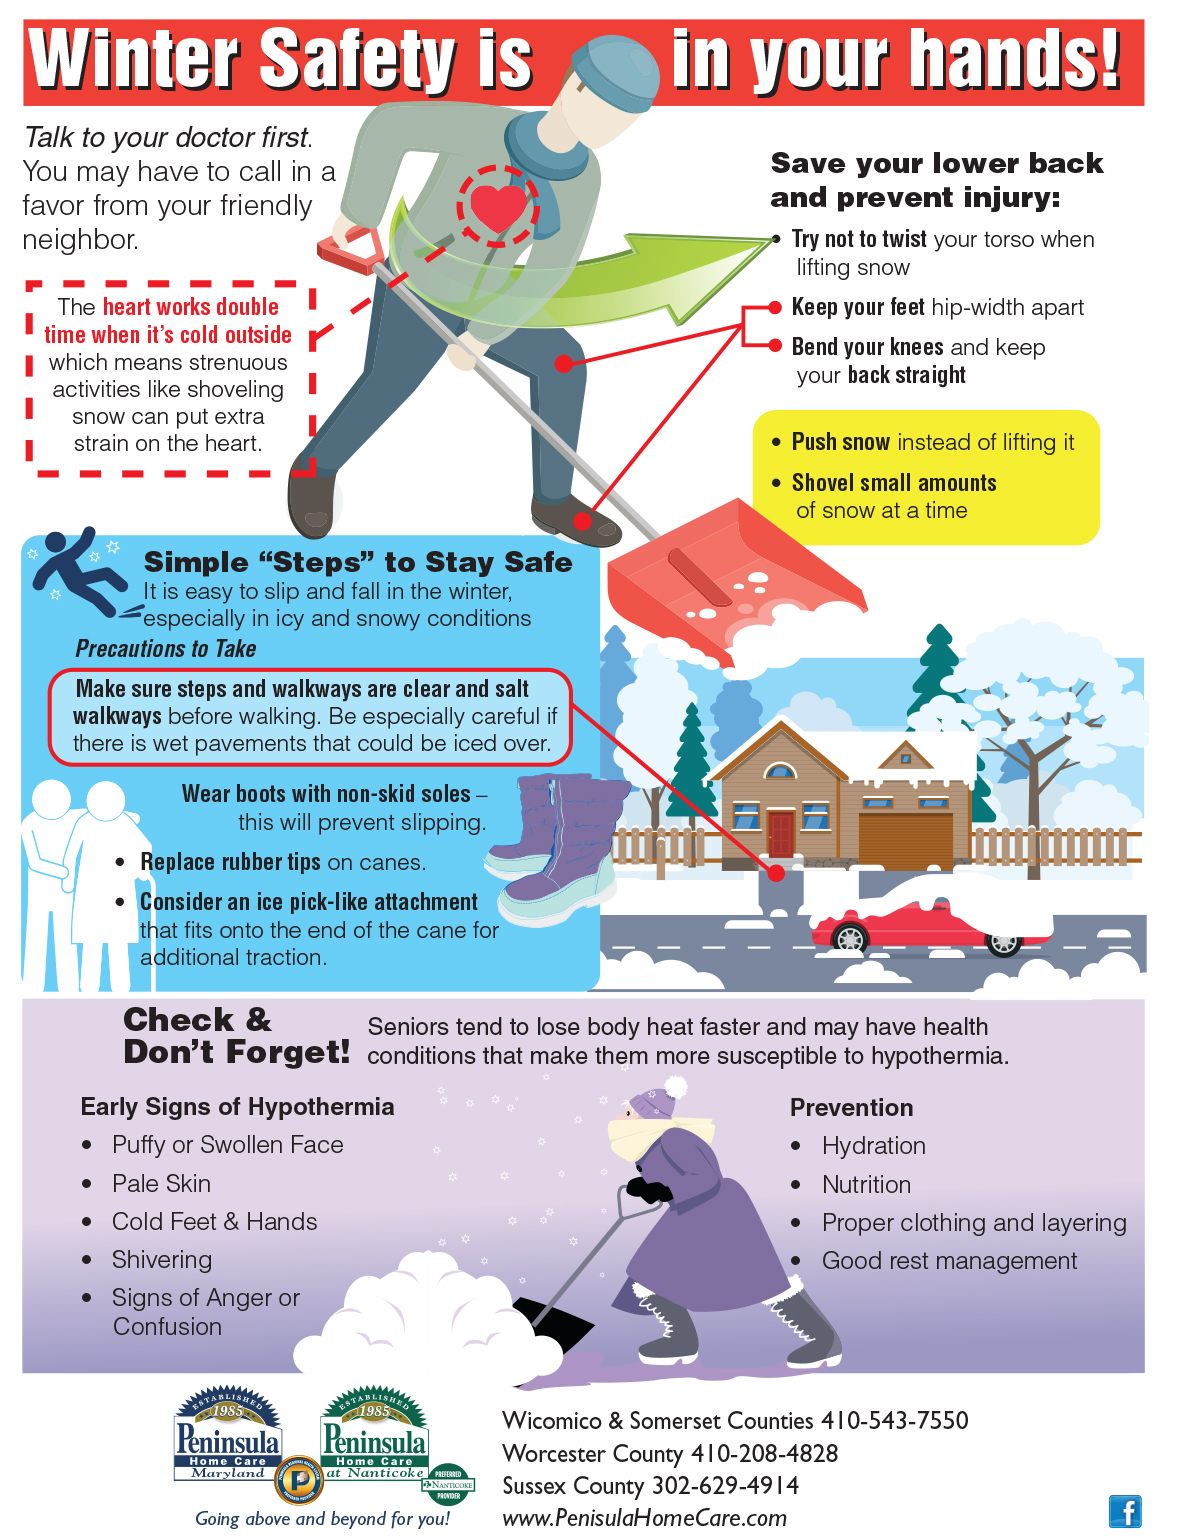 Winter Safety is in your hands!